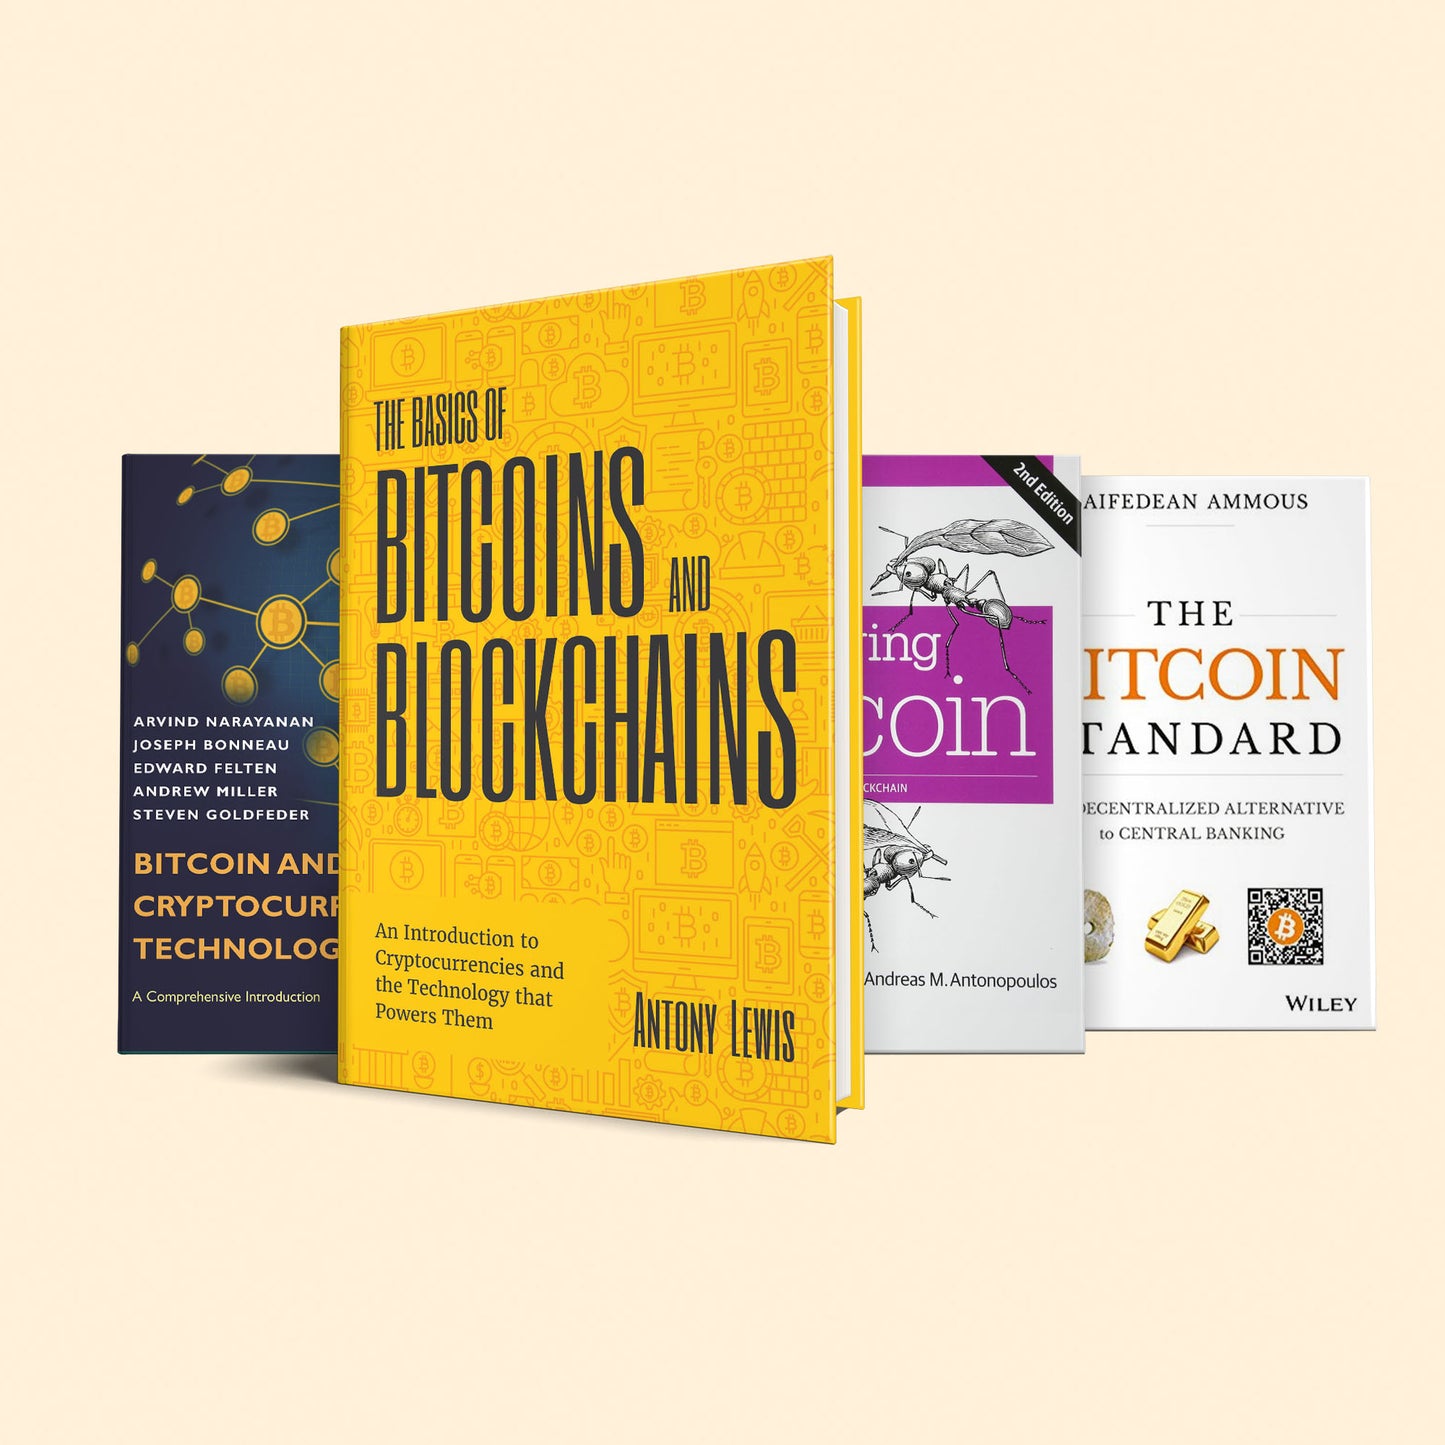 4 Books to get you into the web 3.0: (The Basics of Bitcoins and Blockchains, Mastering blockchain, The Bitcoin Standard)